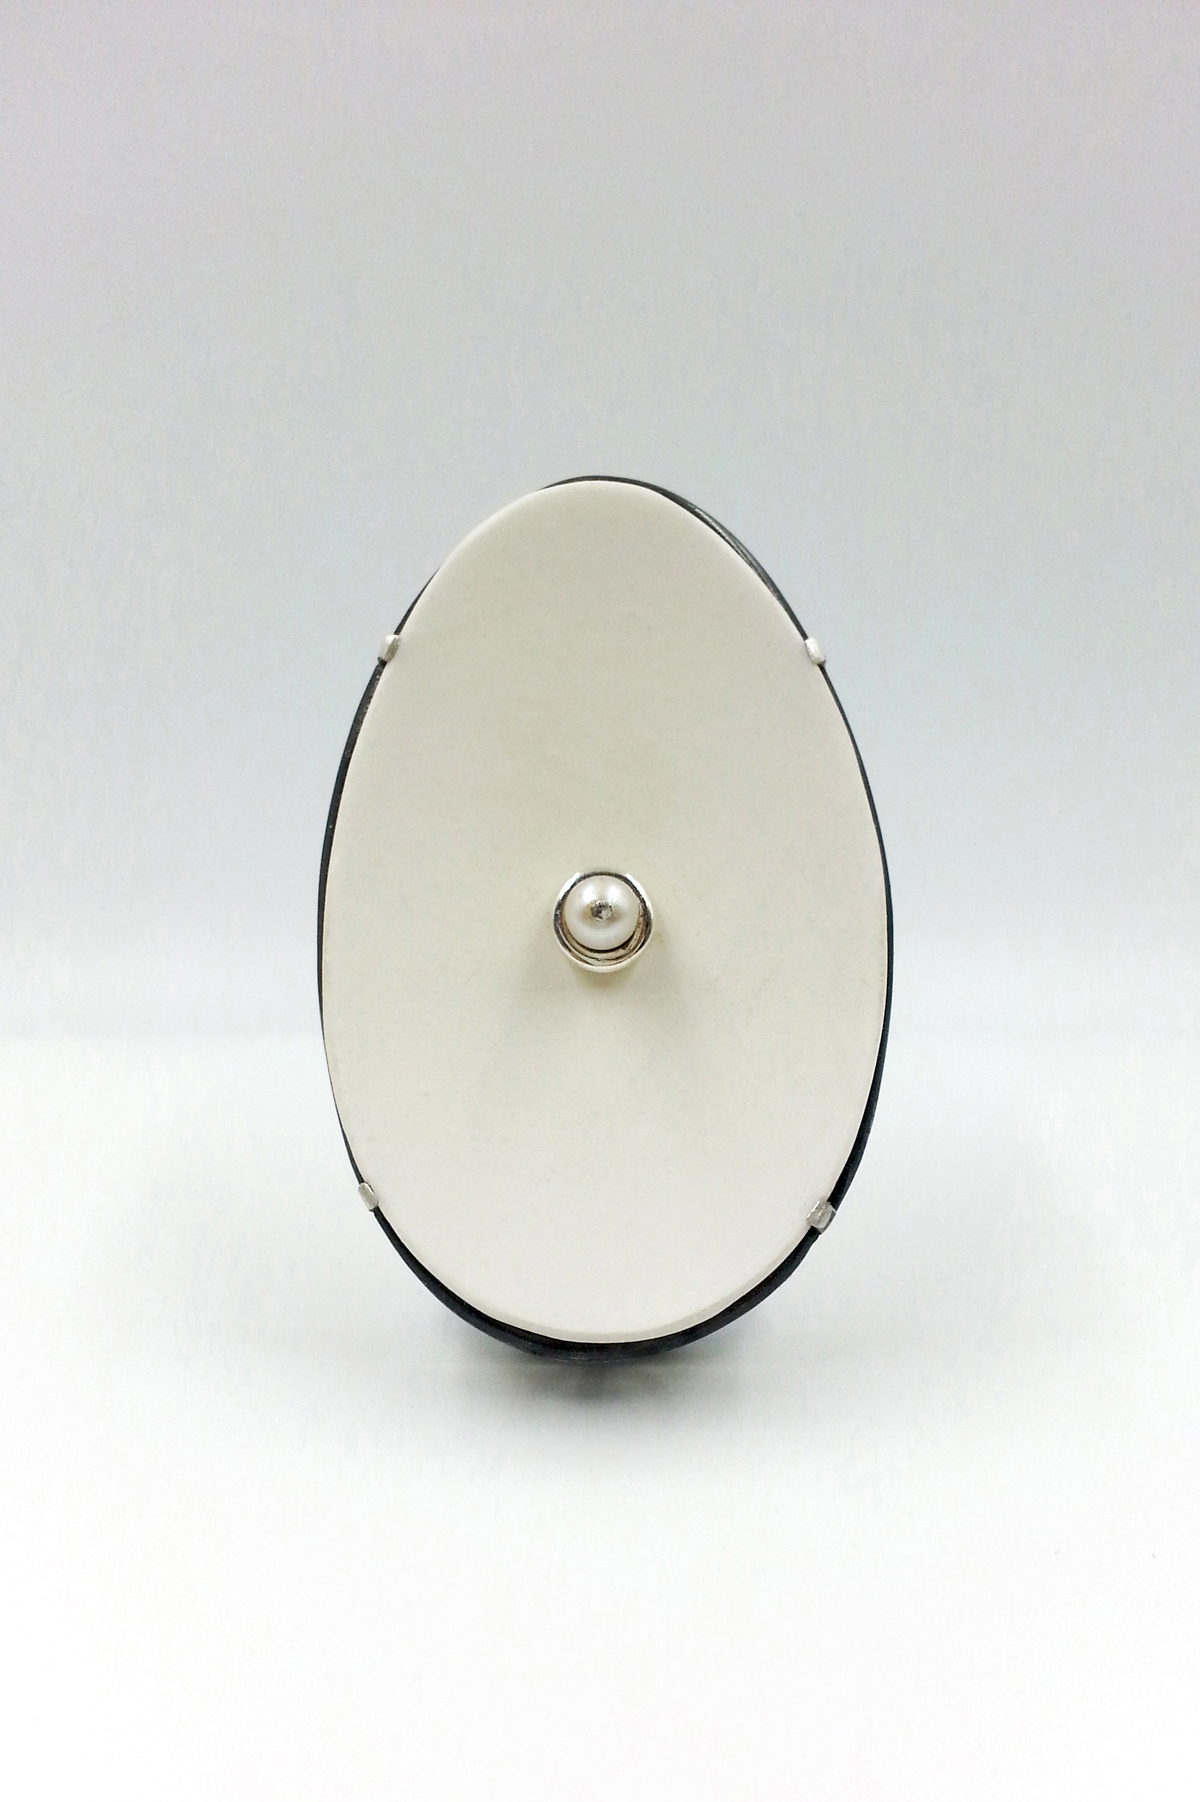 EGG AND PEARL 2 broche argent oeuf d autruche perle ancienne systeme laiton et inox 2017 Patricia lemaire1